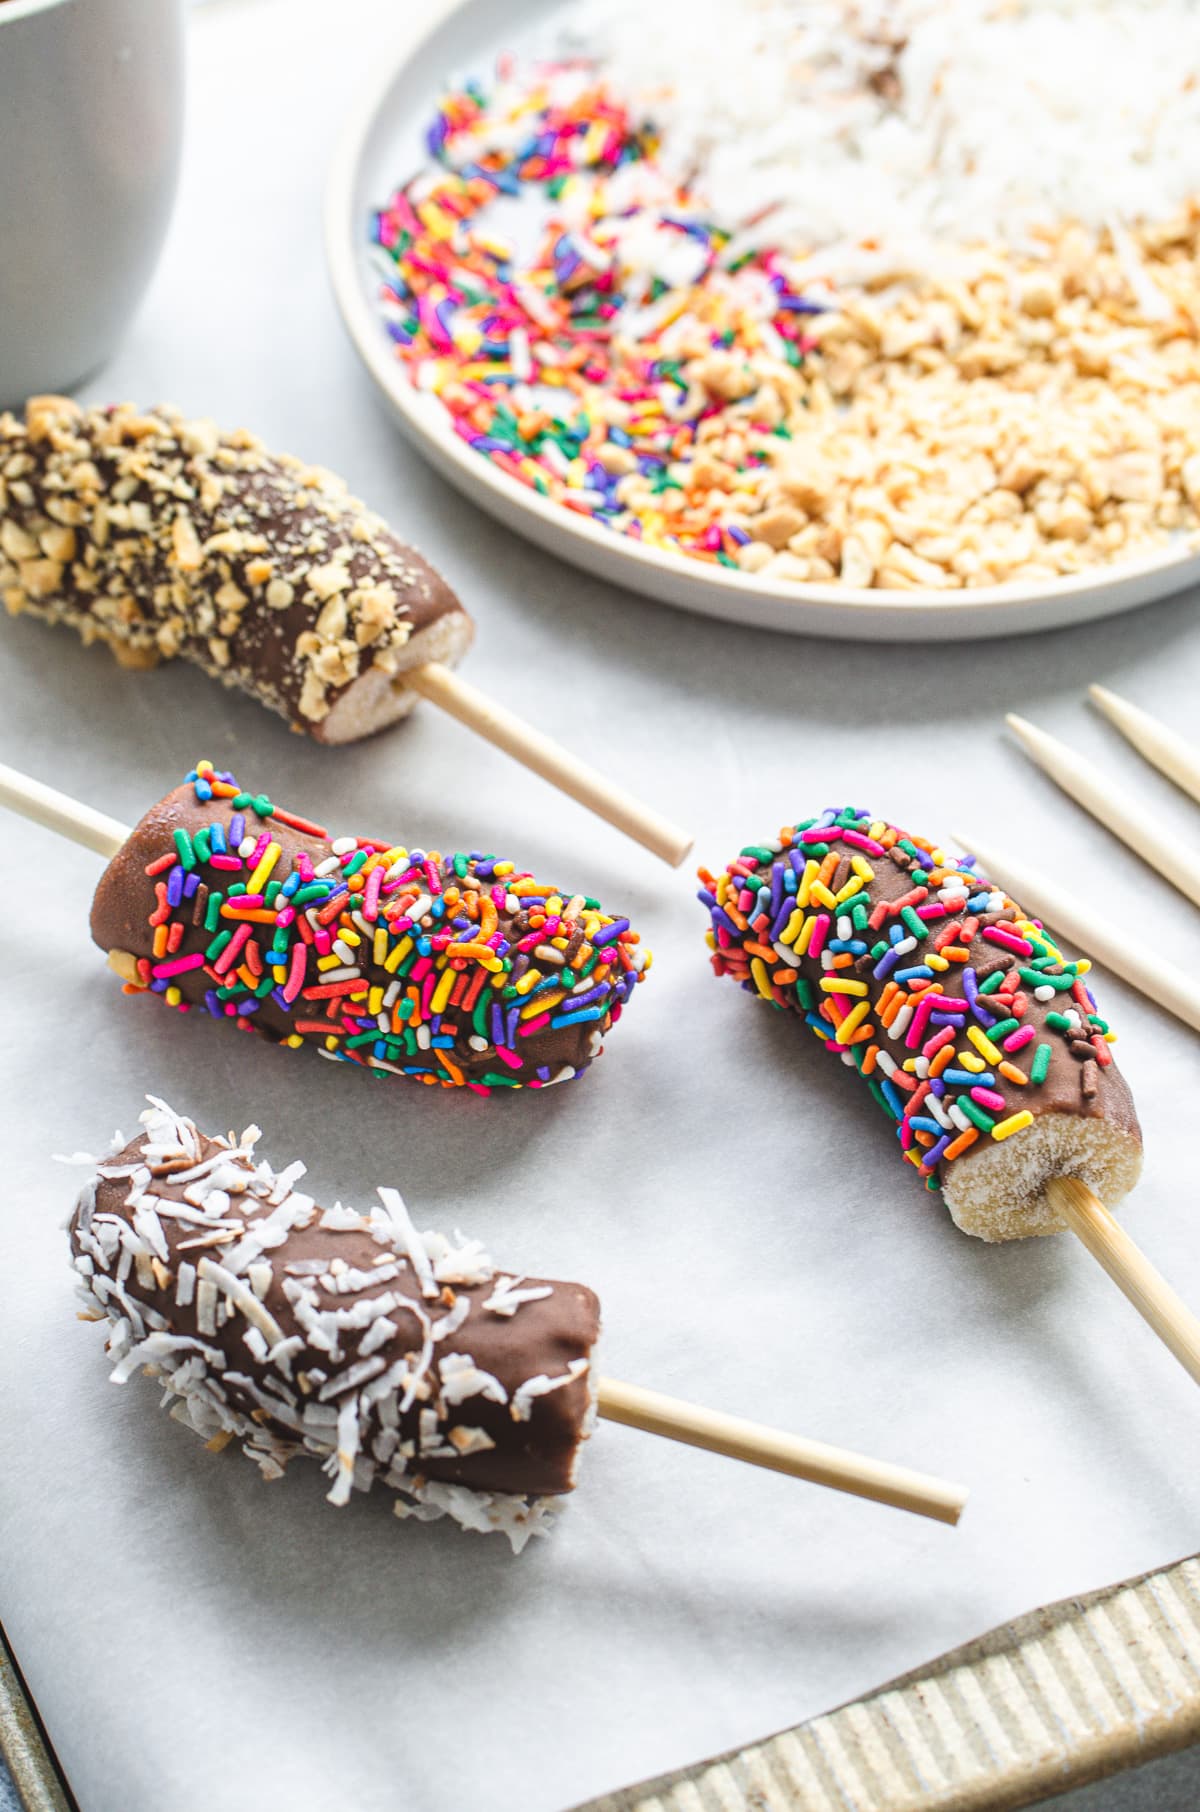 Chocolate dipped frozen banana pops on a sheet of parchment paper with a plate of sprinkle toppings in the background.